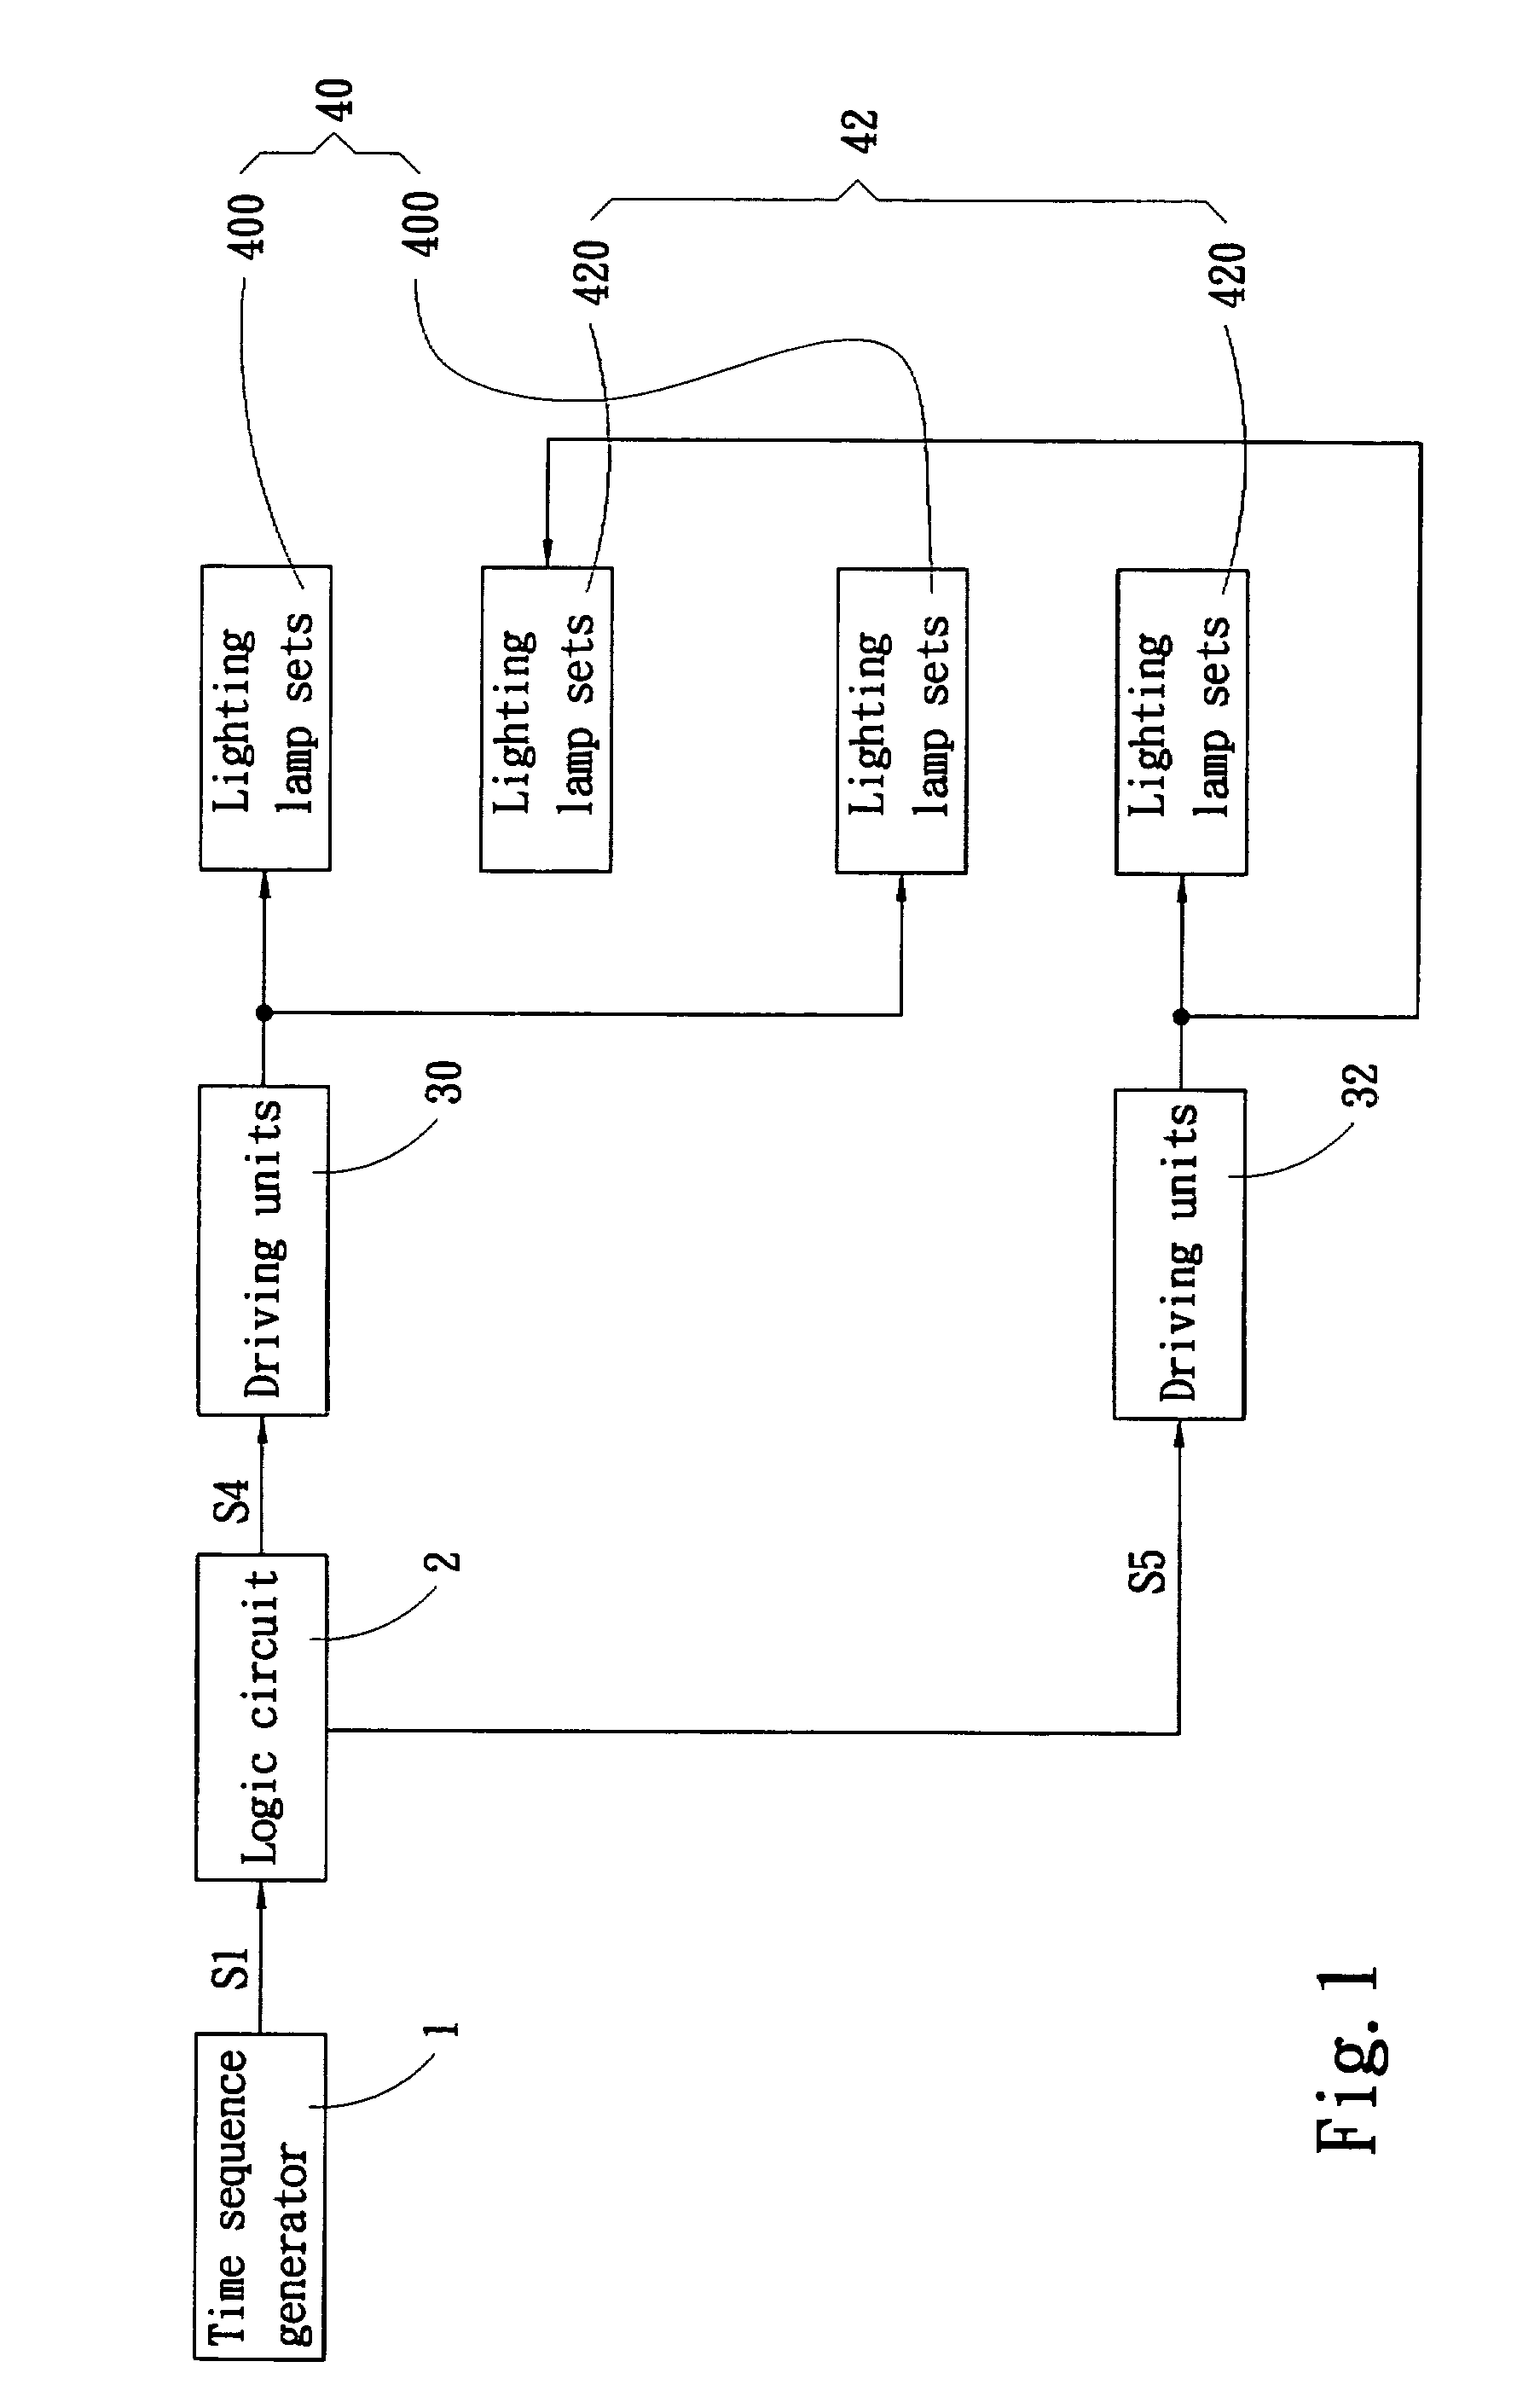 Power saving circuit employing visual persistence effect for backlight modules